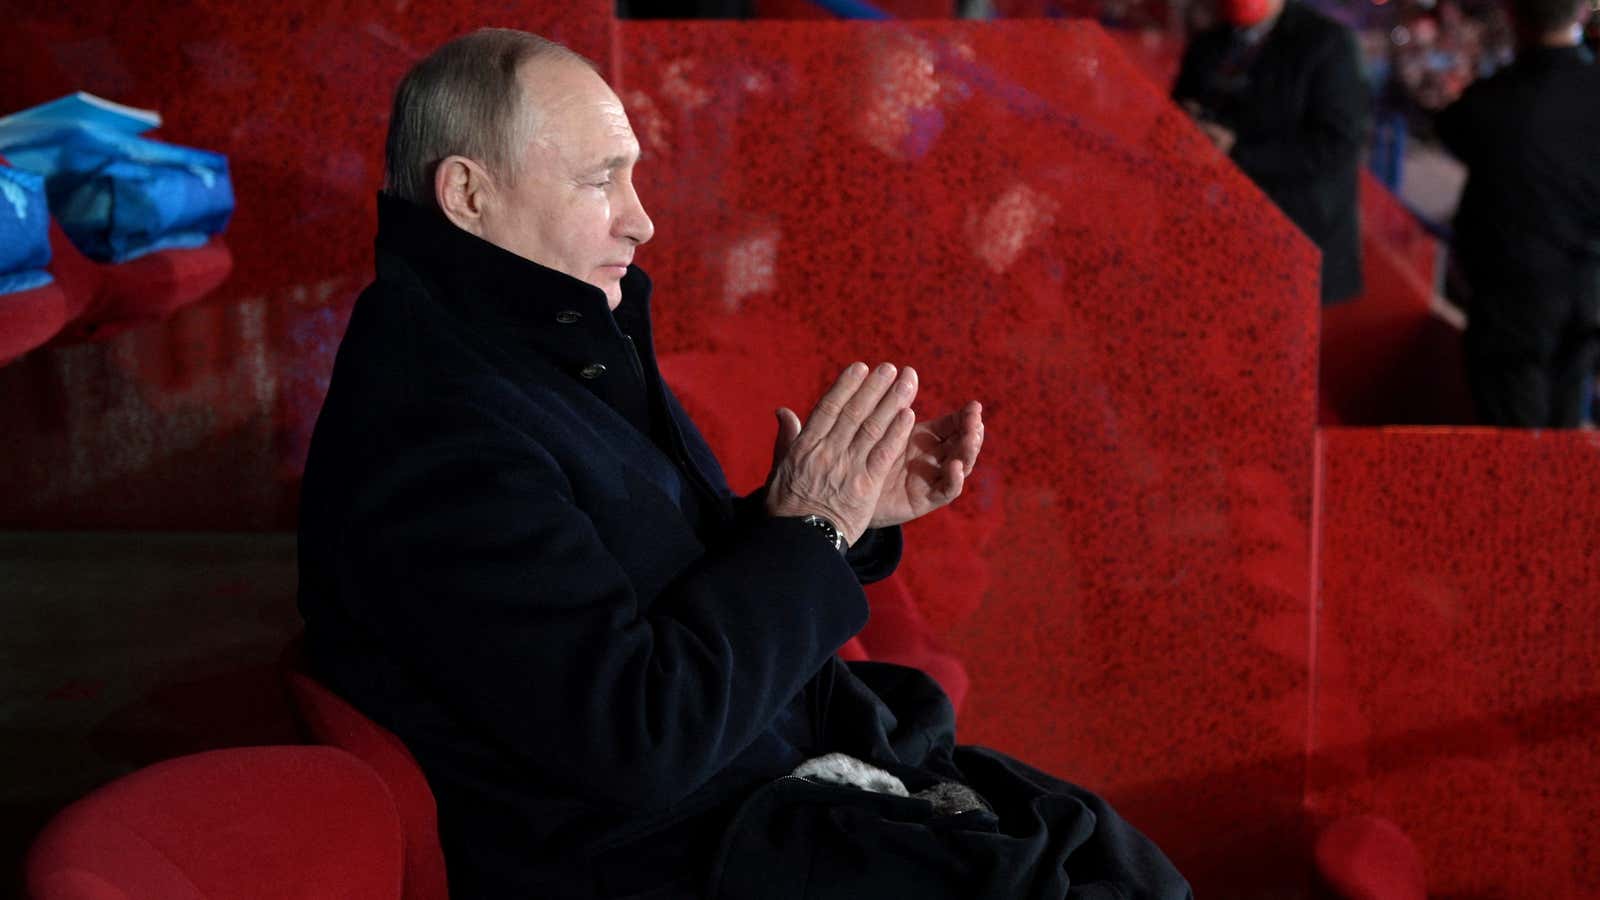 FILE PHOTO: Russian President Vladimir Putin applauds during a ceremony opening the 2022 Beijing Olympic Winter Games in Beijing, China February 4, 2022.